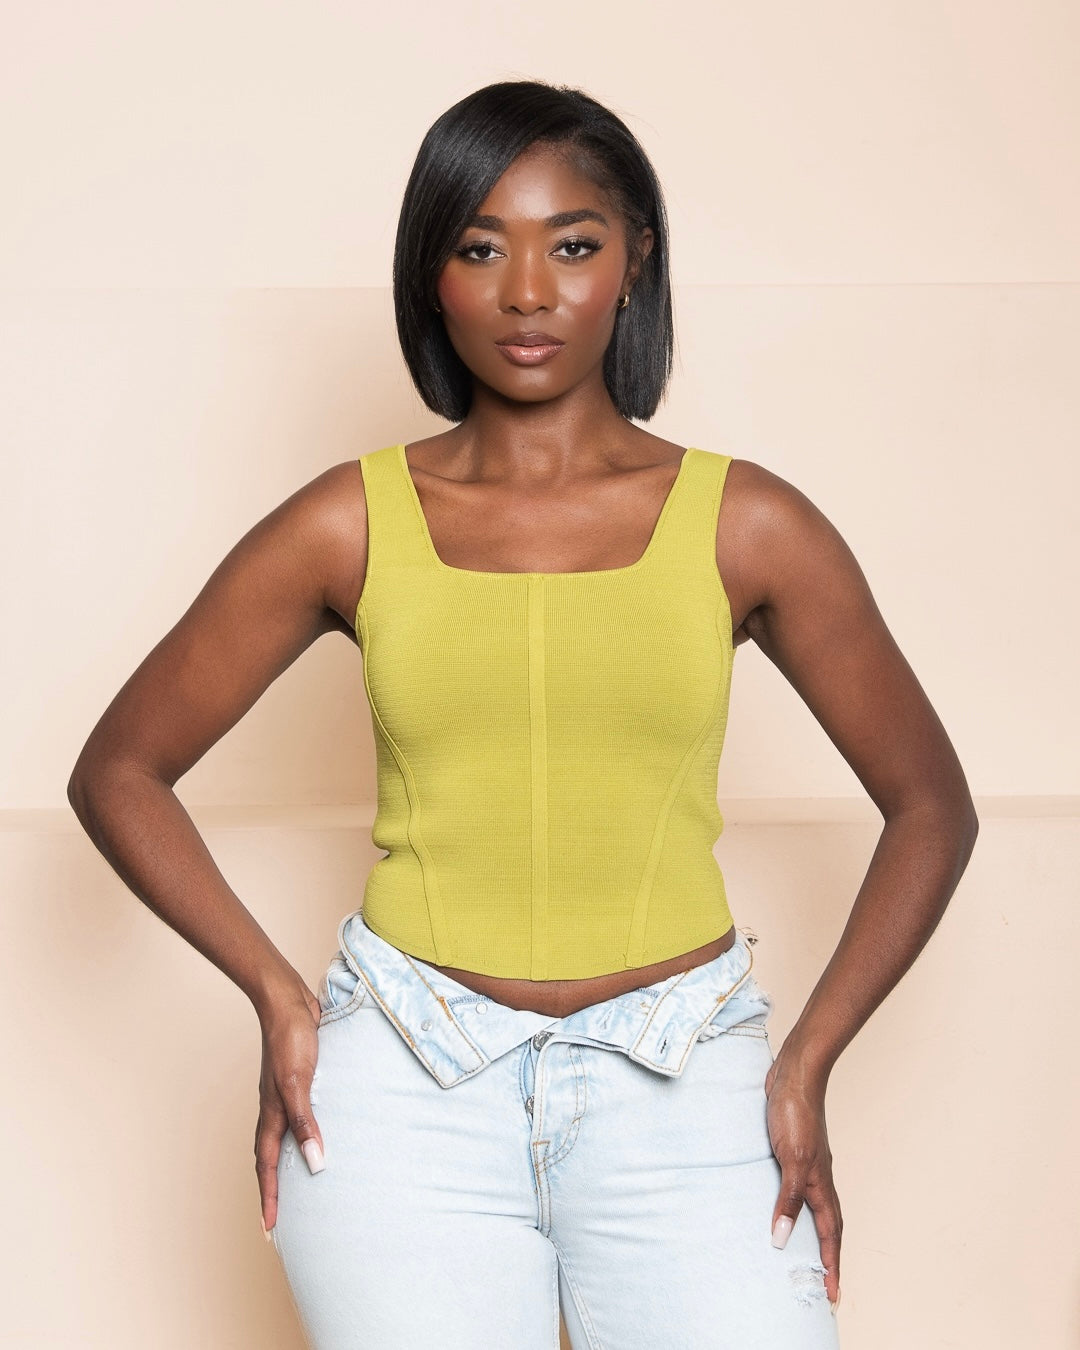 WOMENS SPRING TOP - WOMENS SUMMER TOP - KNIT TOP - GREEN TOP - CORSET KNIT TOP - THICK STRAP TOP - LIME GREEN TOP - WOMEN'S TOP - BOUTIQUE - FASHION TOP - TRENDY CLOTHING - TRENDY TOP 